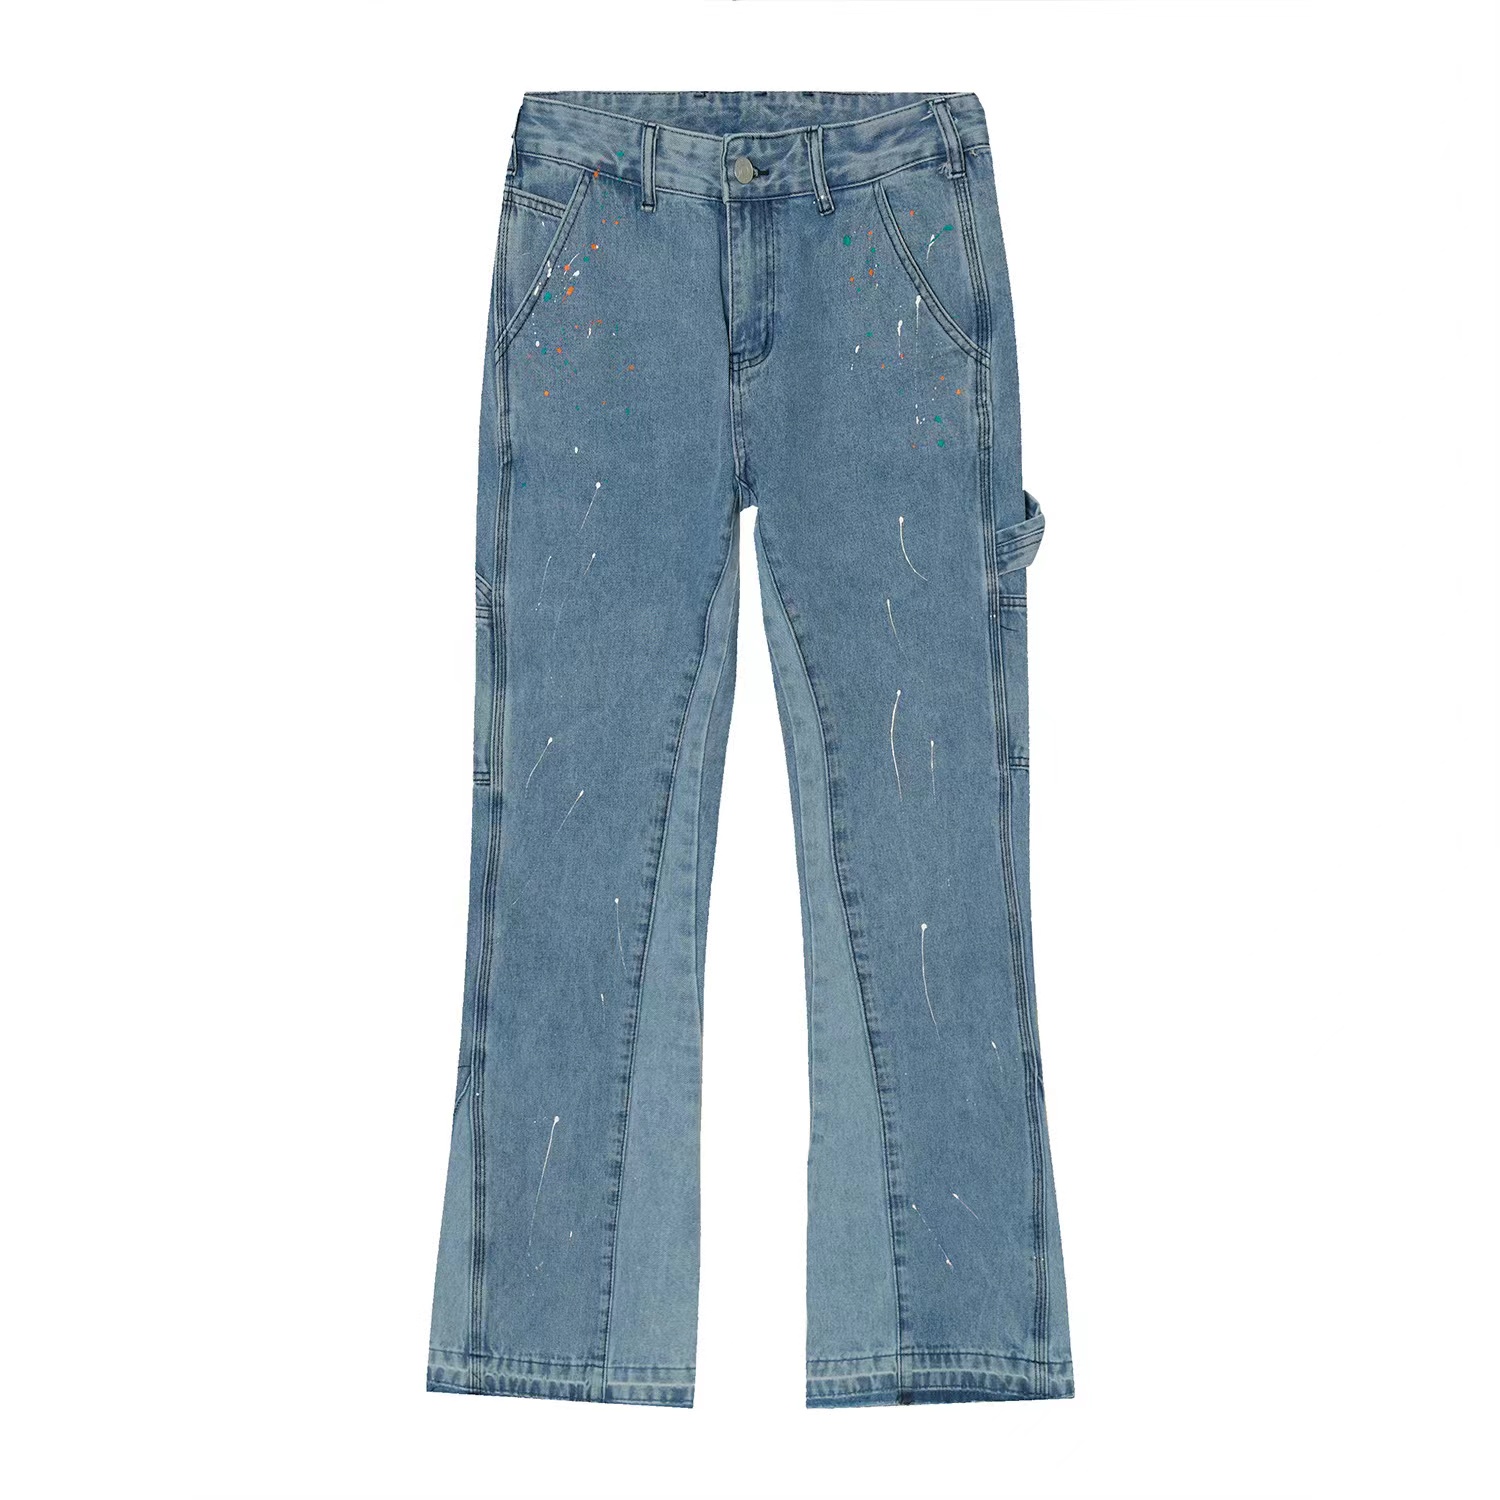 Original Factory 1980s Womens Jeans - Casual loose men’s wide leg pants personality patch – Yulin